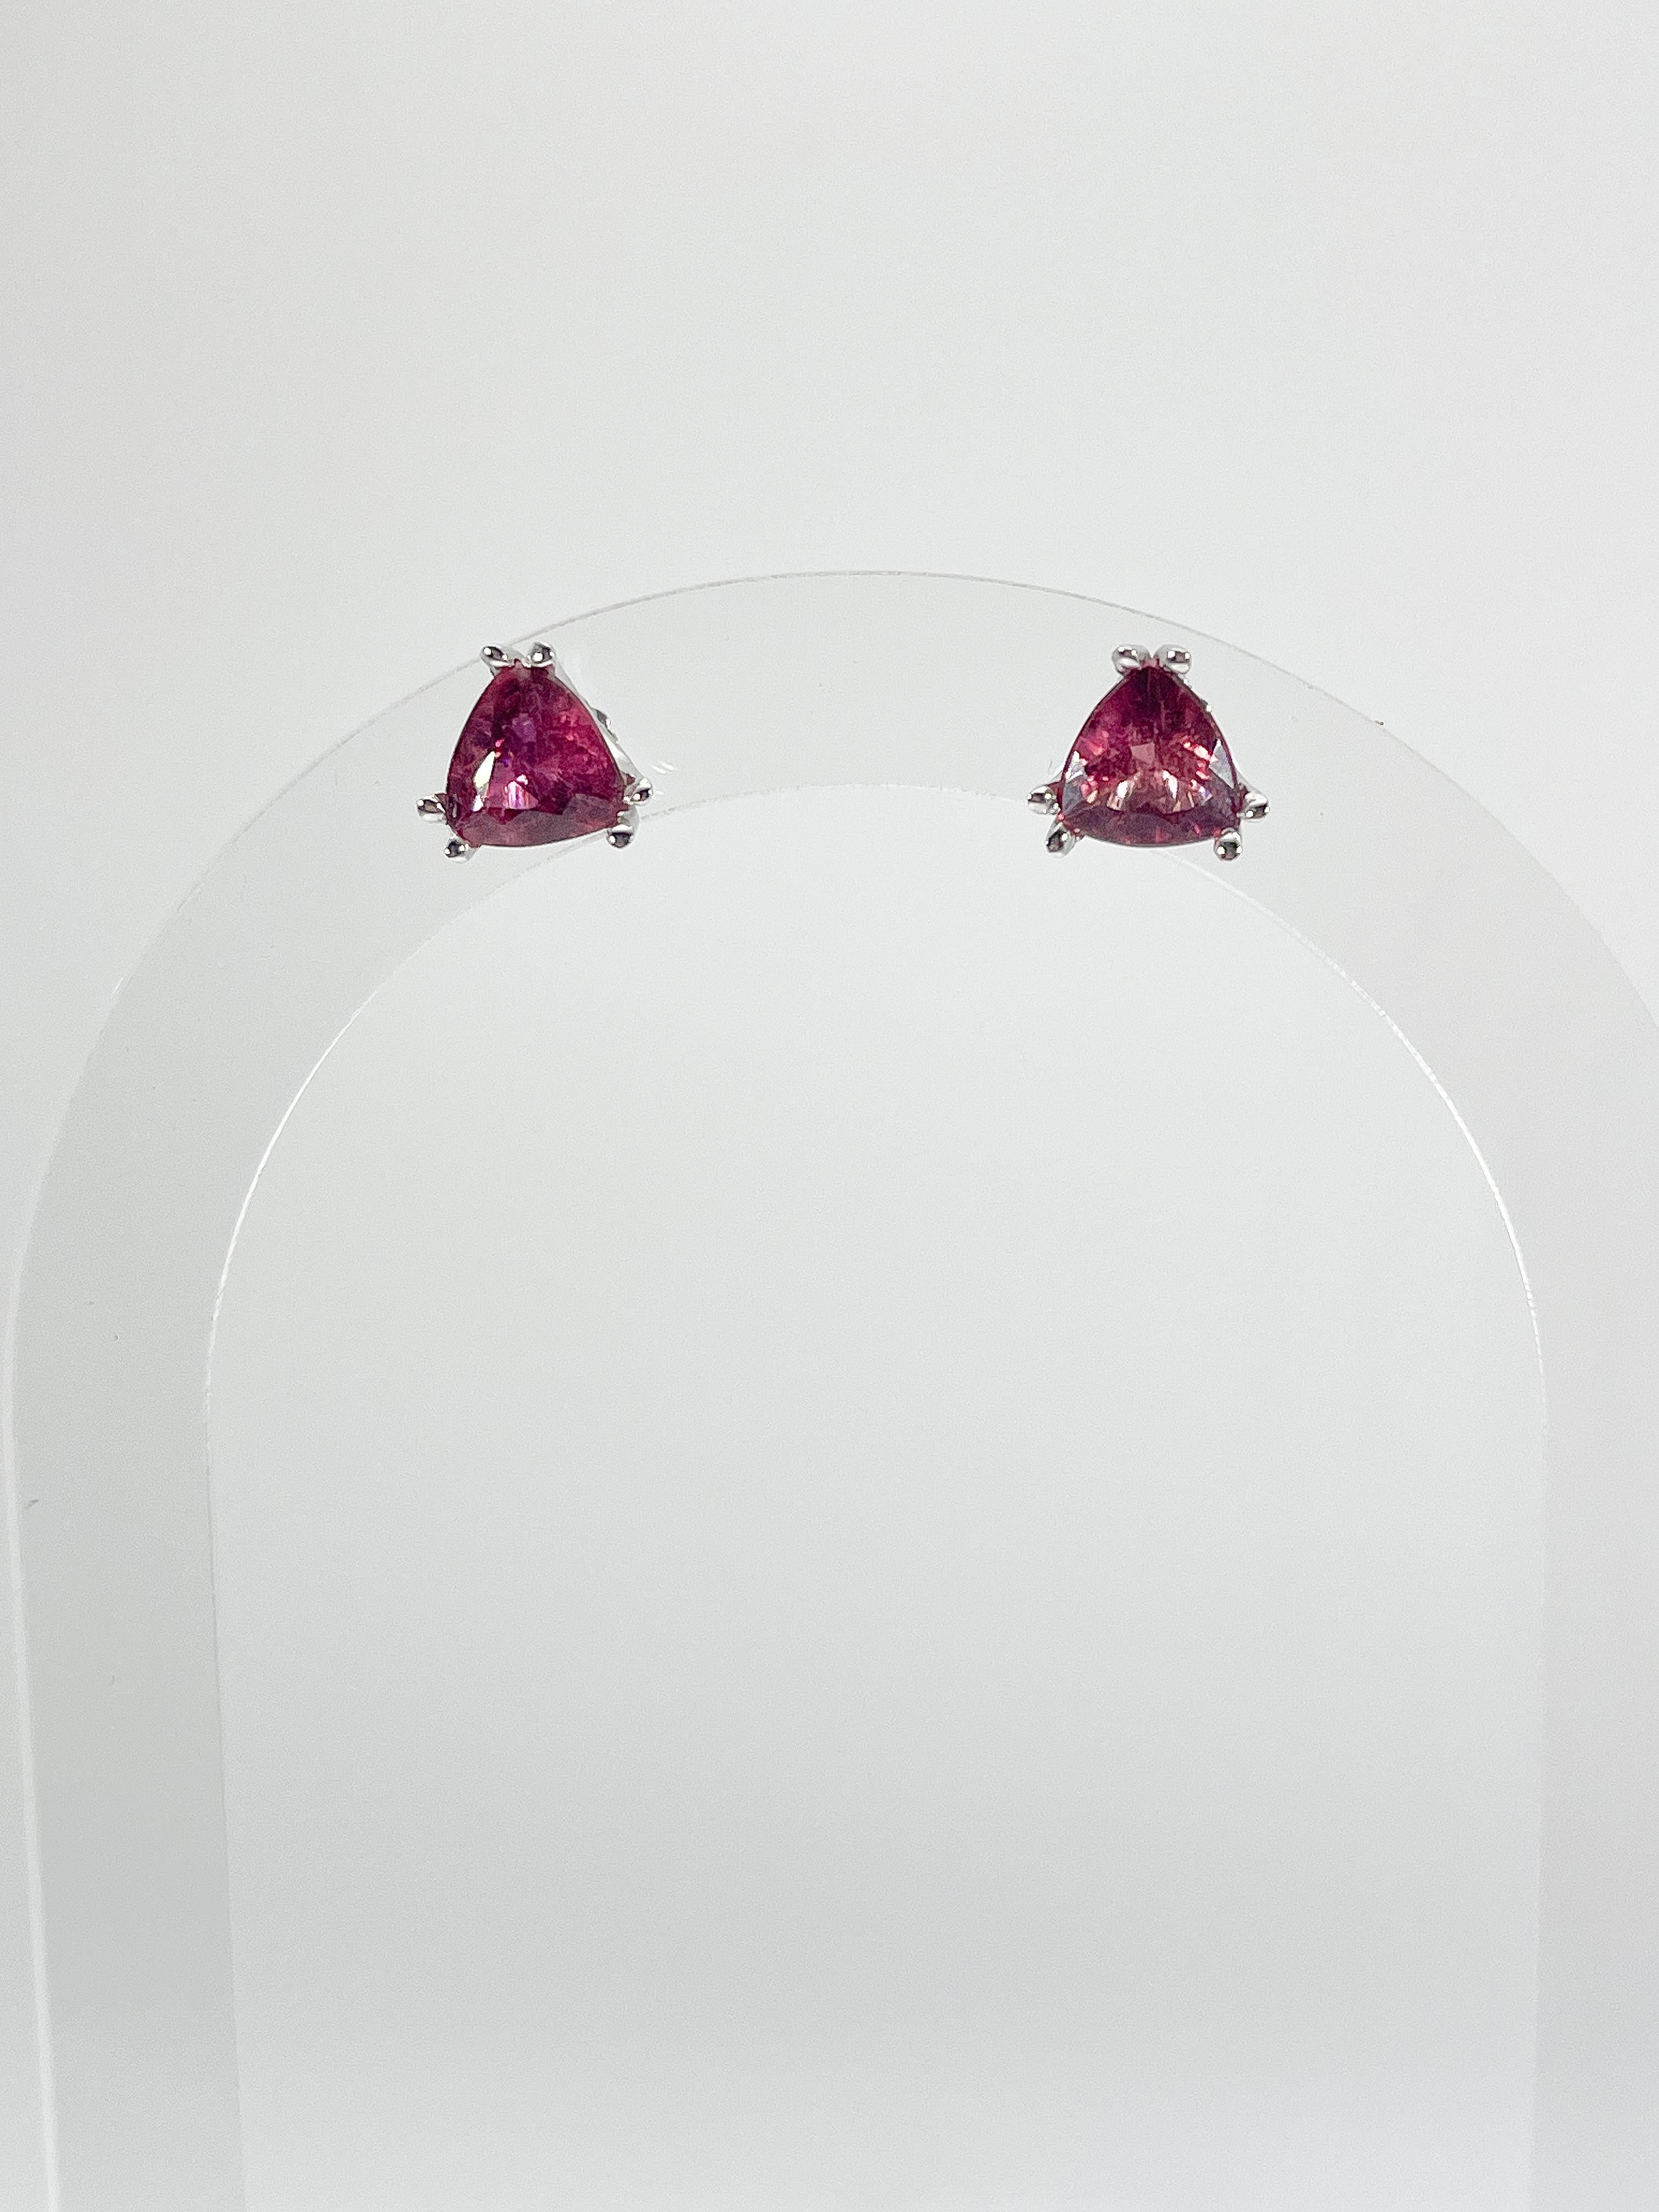 14k white gold trillion cut pink tourmaline double prong stud earrings. stone measures 8.2 x 8.2, the earrings have a total weight of 2.66 grams.